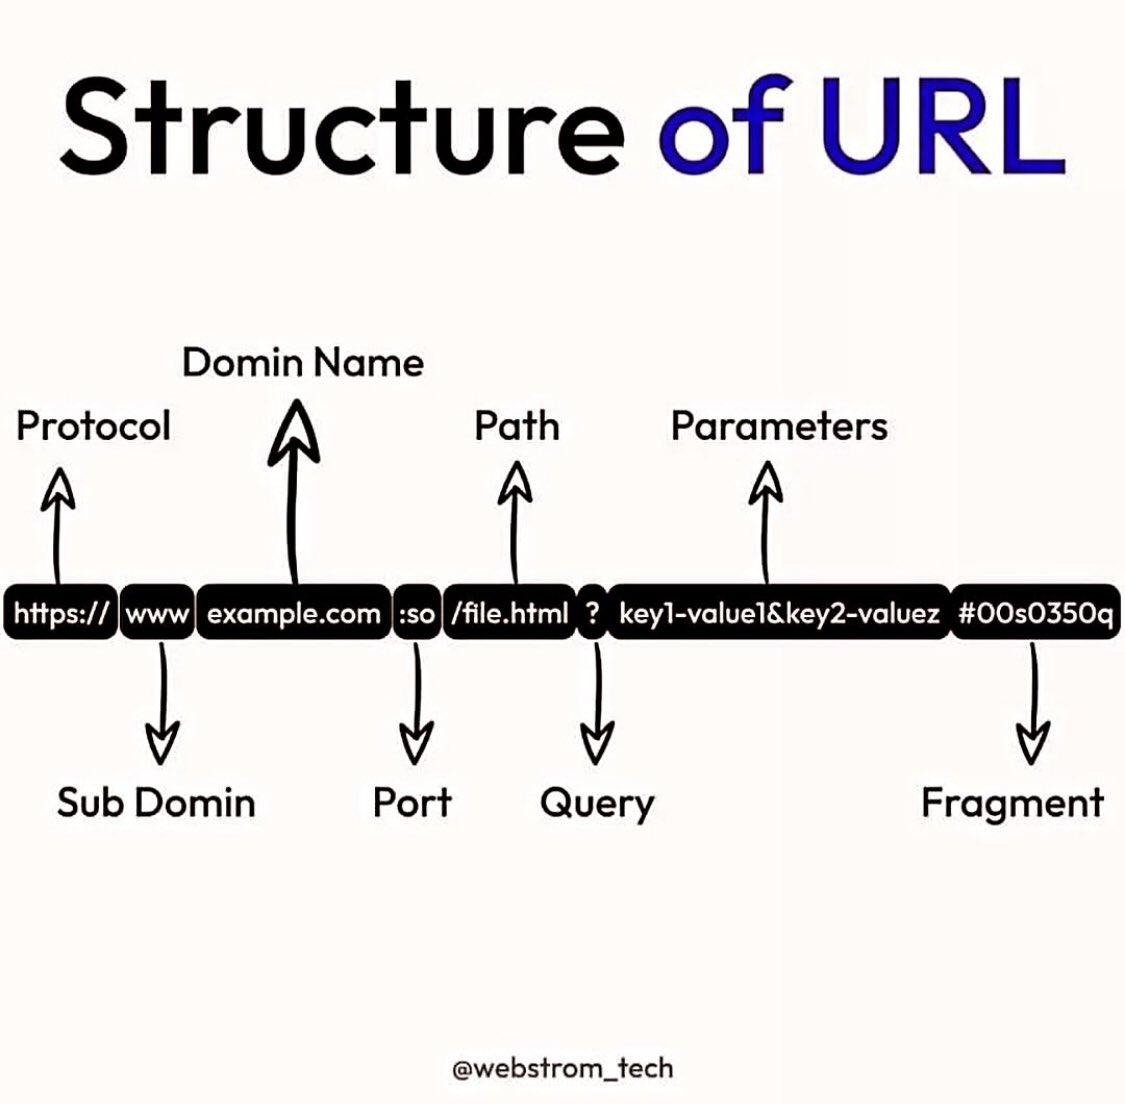 Structure of URL